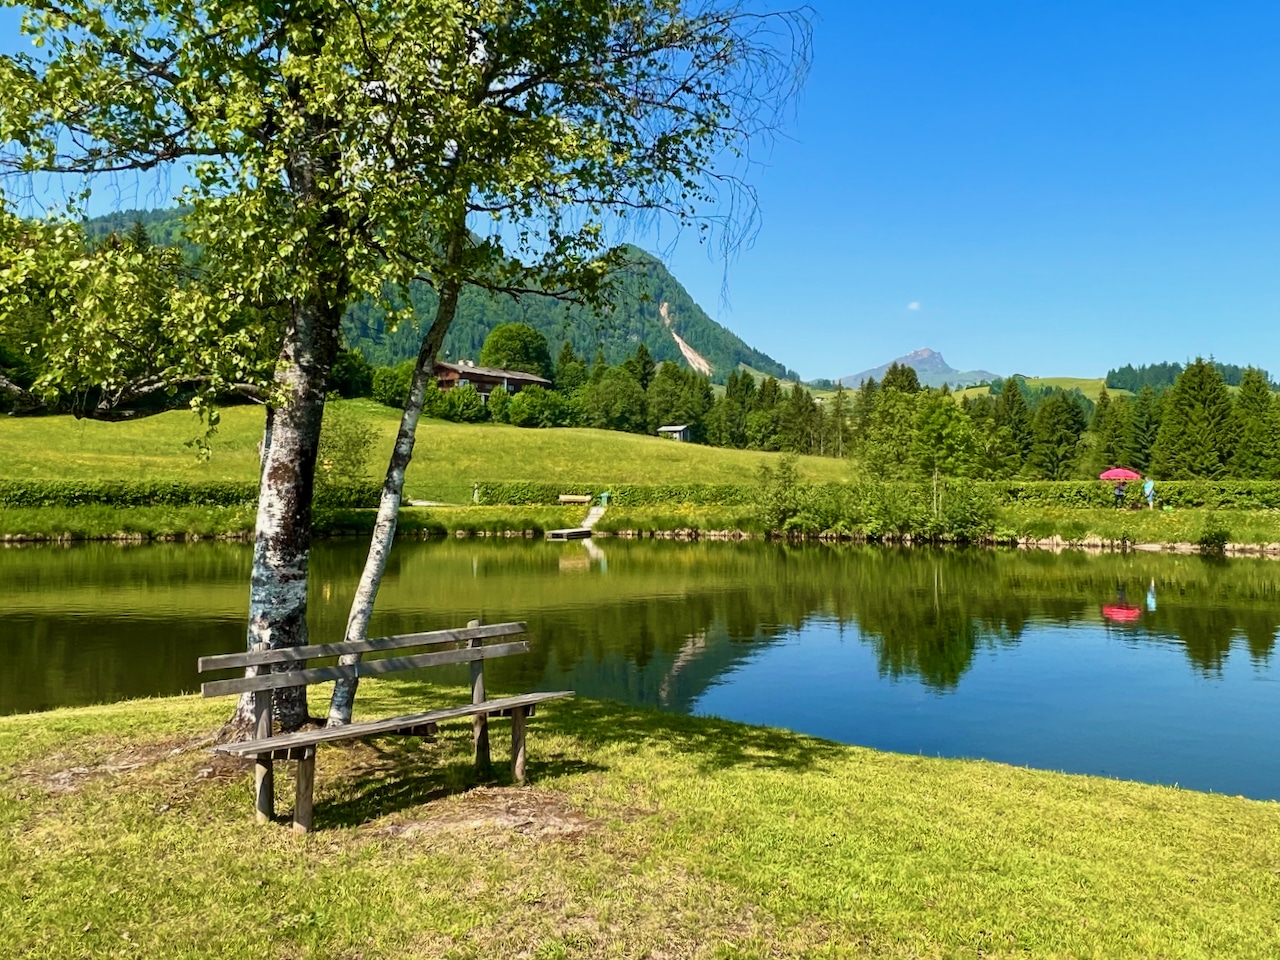 After a day full of hikes and experiences, we first went to the idyllic Lauchsee for an hour to swim and relax. Travel Report Fieberbrunn Pillerseetal experiences tips sights activities